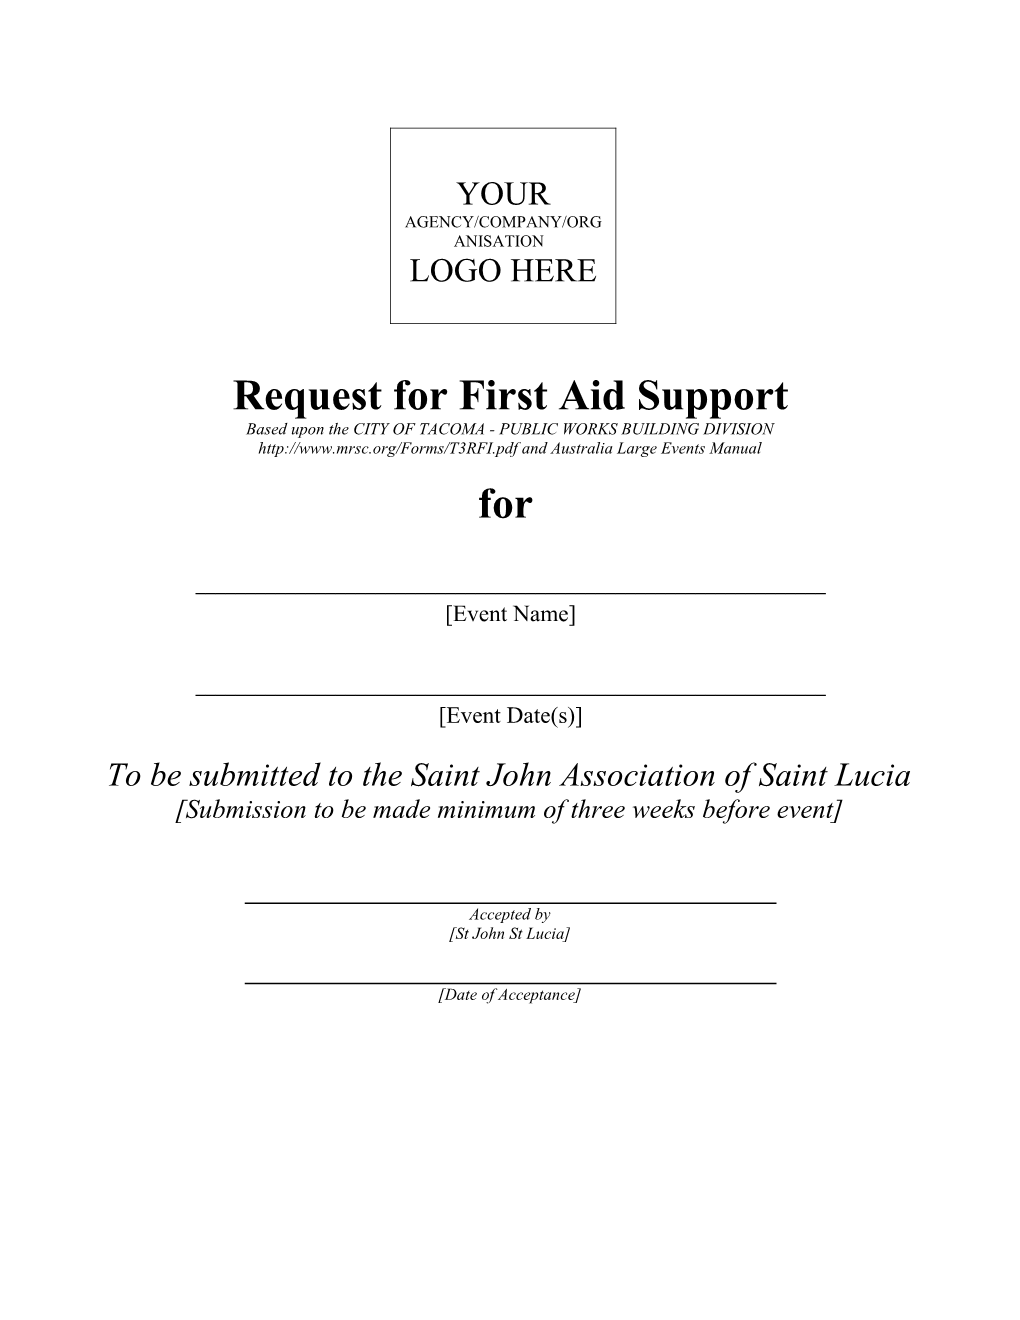 Request for First Aid Support